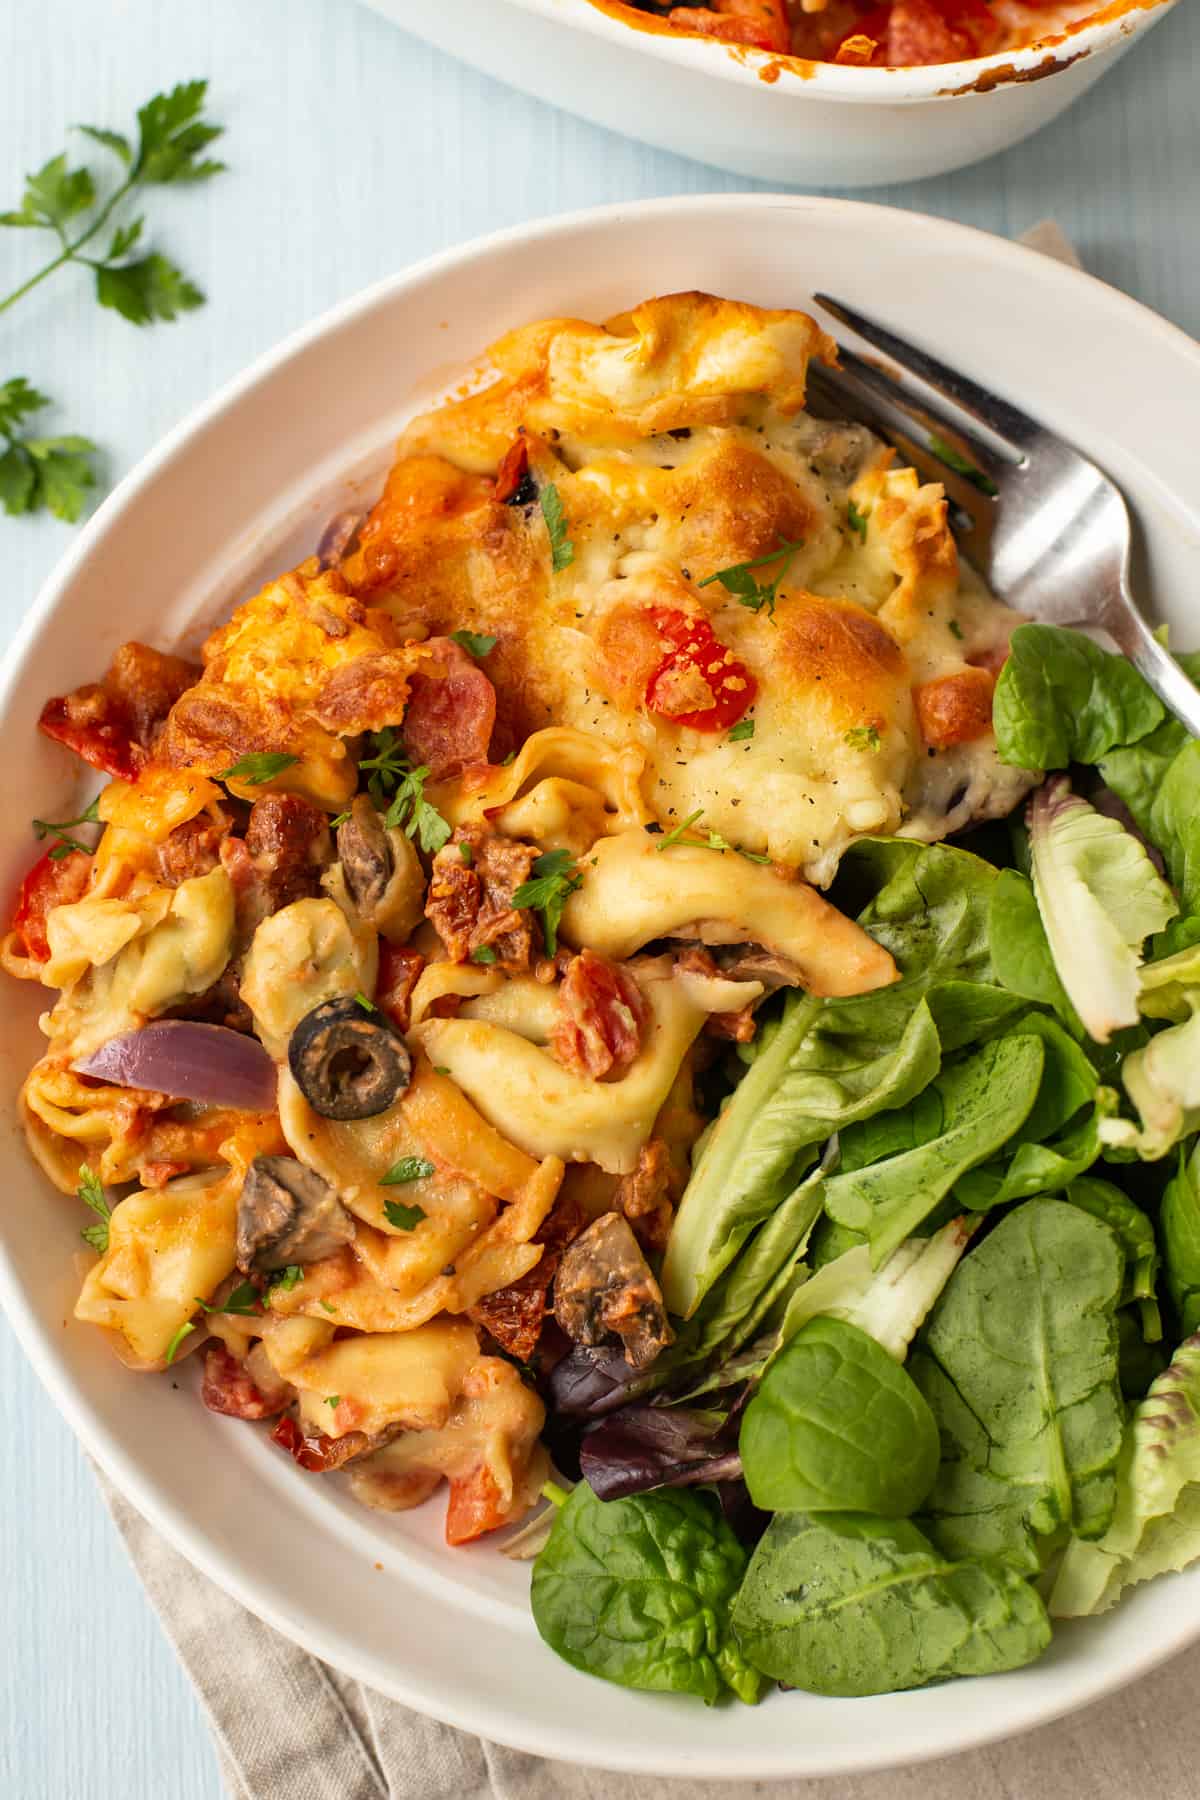 A portion of creamy tortellini bake in a bowl with green salad.